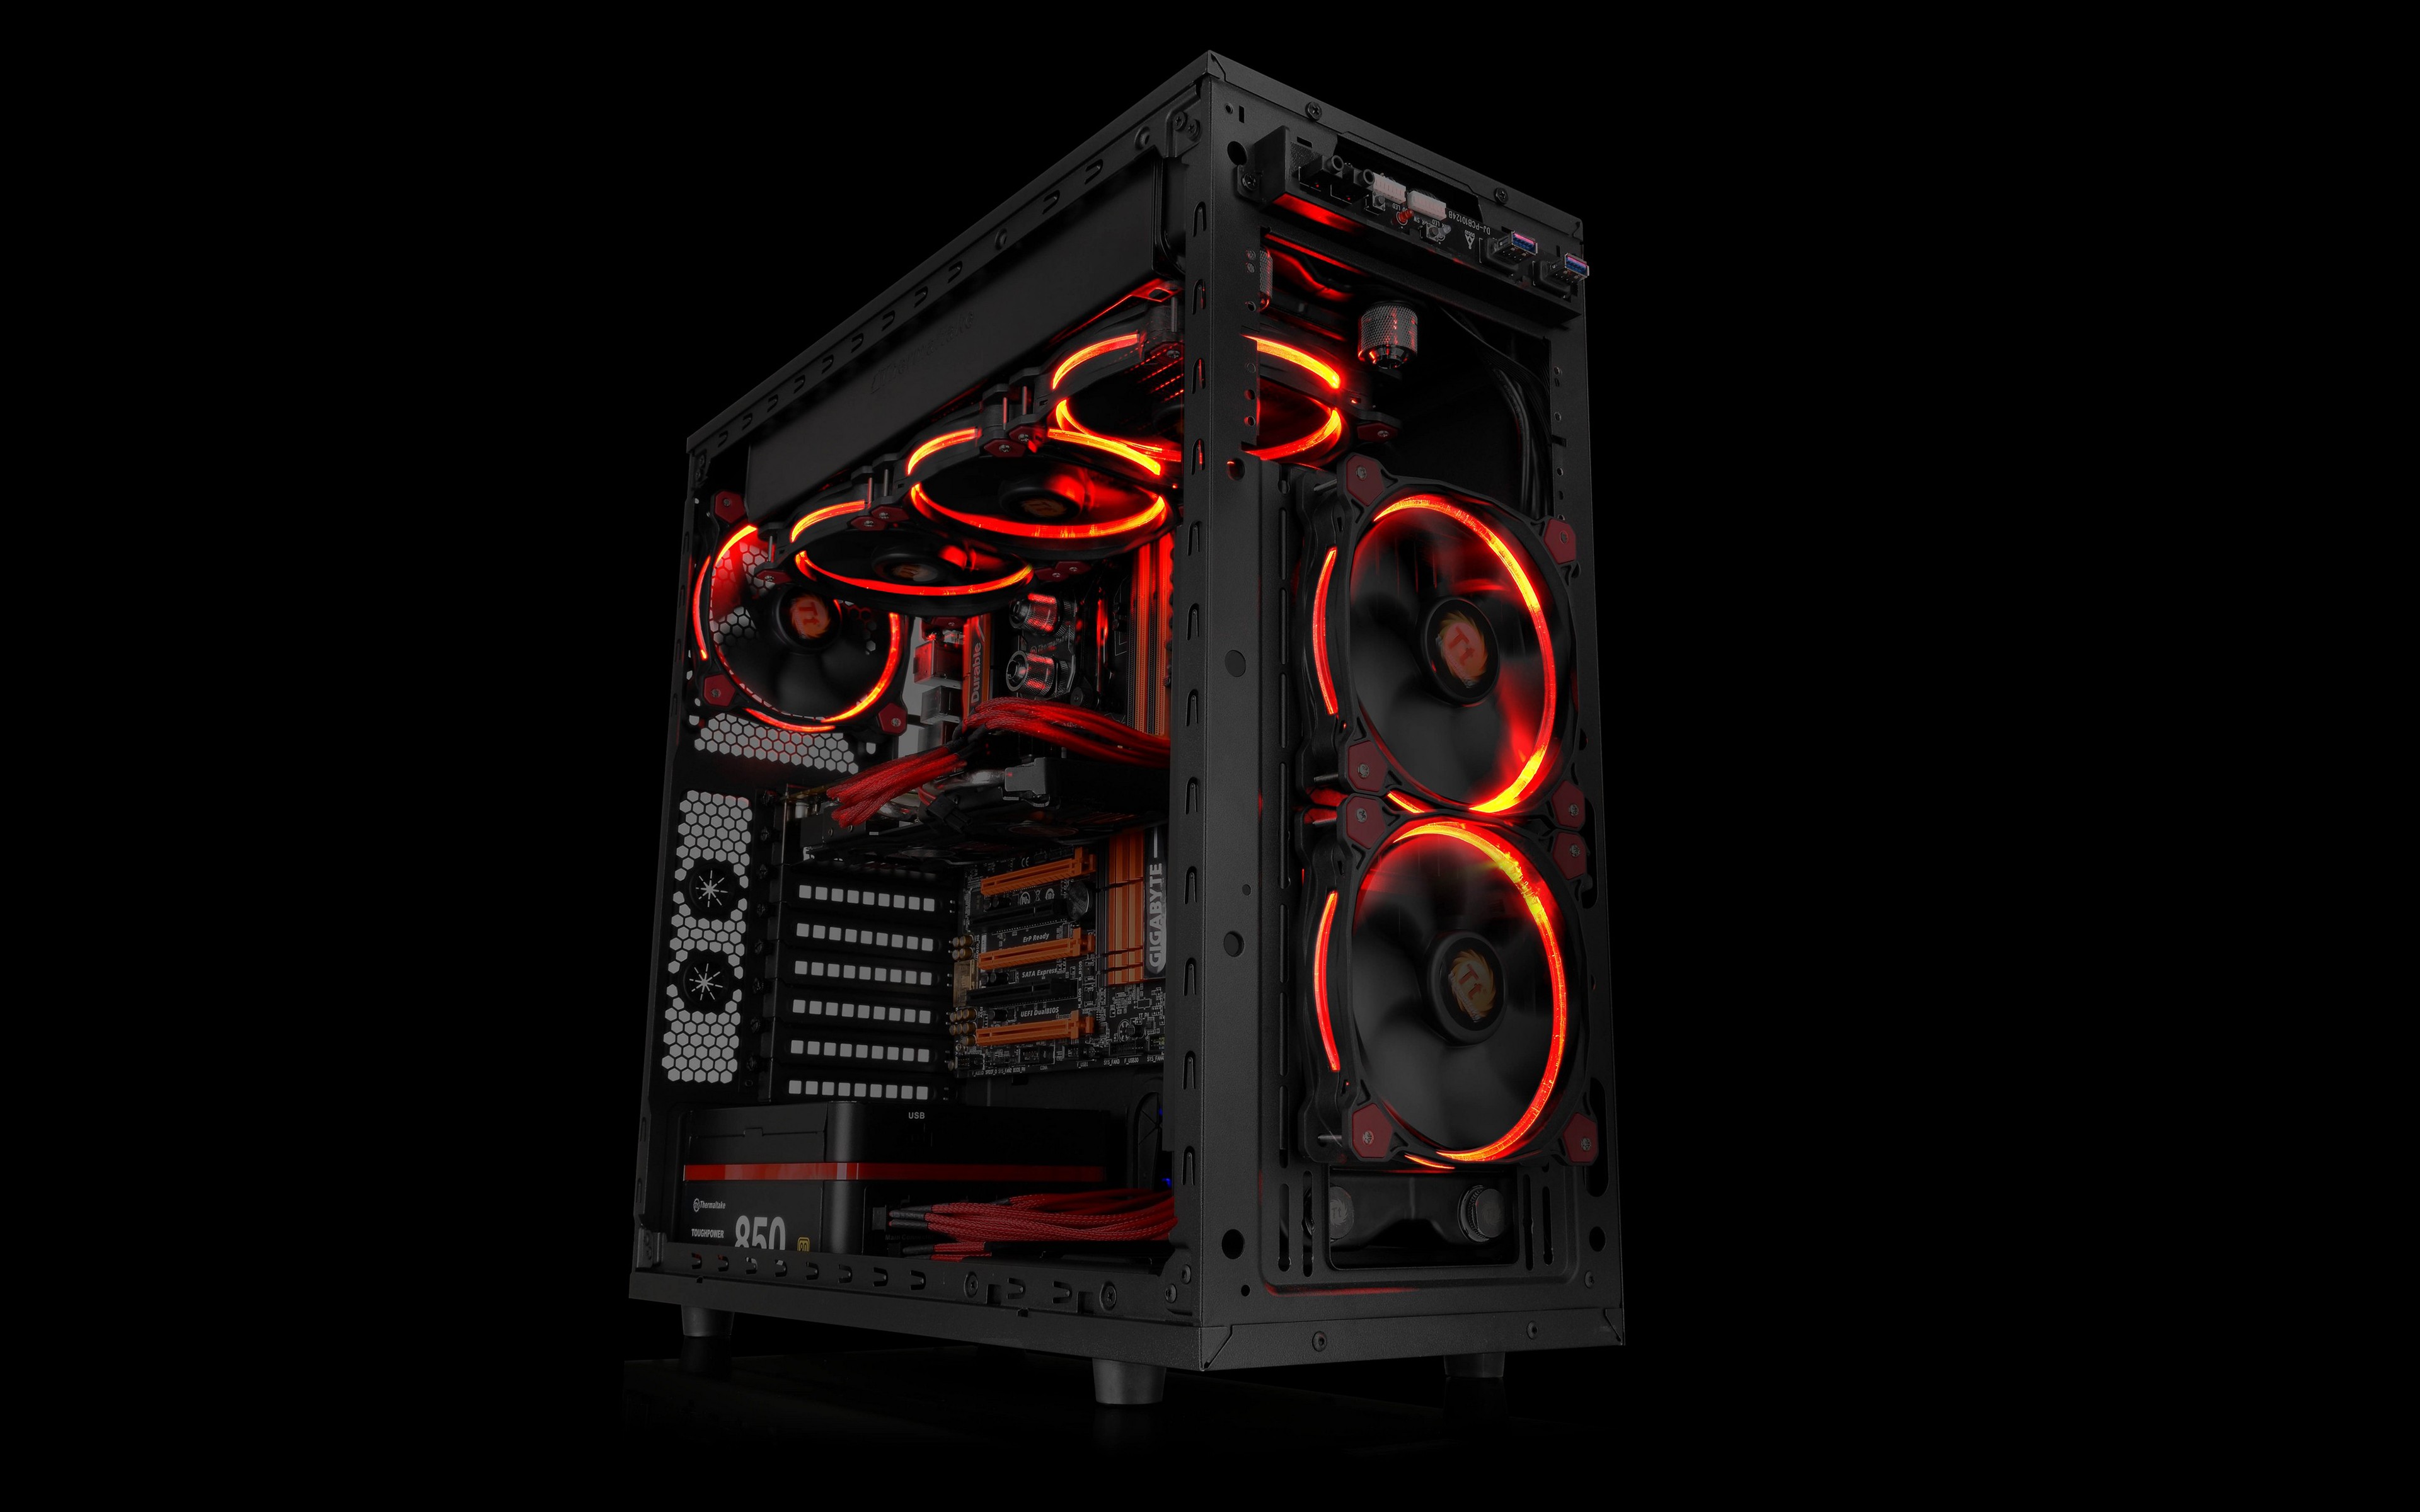 General 3840x2400 PC gaming computer PC cases technology Gigabyte hardware simple background PC build RGB